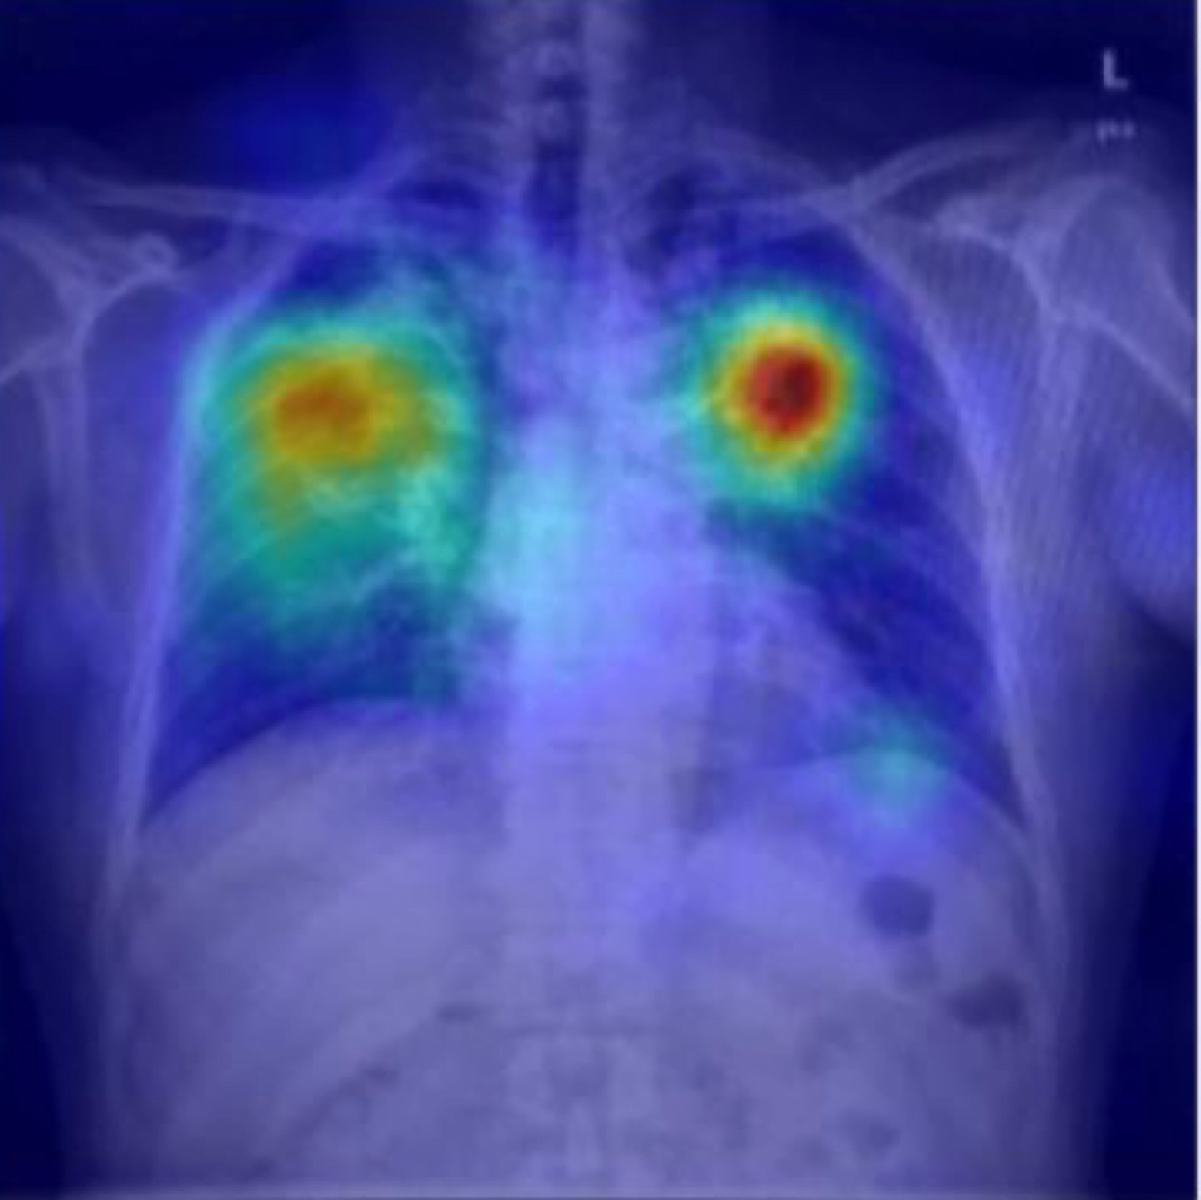 Tuberculosis Detection in XRAY Images using Matlab 1